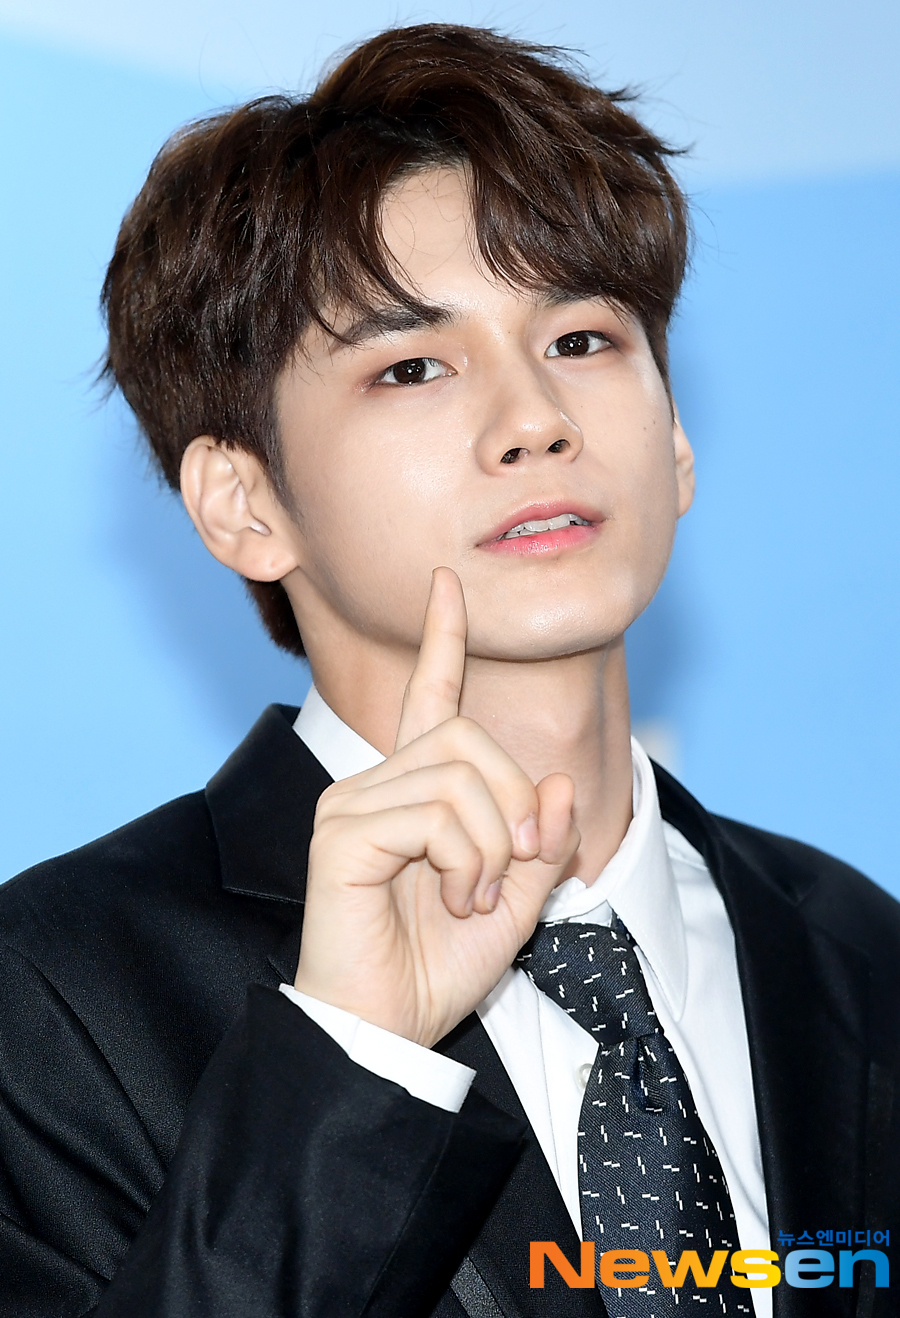 Happy Birthday! Happy Ong Seong-wus Day!Singer and actor Ong Seong-wu from the group Wanna One celebrated his 26th birthday.Ong Seong-wu was born in Incheon on August 25, 1995, and is a singer and actor who majored in practical dance at Hallym Entertainment Arts High School and acting arts at Dongseoul University.Ong Seong-wu debuted as a group Wanna One with his beautiful appearance, stable vocals and dance skills through Mnet Produce 101 season 2, 2017, and he became a popular entertainment artist with various programs such as Master Key, Running Man, Deacons Universal, Point of Battery Interference, Radio Star and Jungles Law.The Number of Cases is a drama depicting the real youth romance of two men and women who love each other for 10 years. Ong Seong-wu is a charming man who has been ringing the hearts of women since his school days, and plays the role of photographer Lee SooOng Seong-wu is expected to delicately solve the changing feelings of Lee Soo, which was indifferent to others and cold with the wounds received from parents during childhood.Ong Seong-wu is also continuing his career as a solo singer.Following the first digital single WE BELONG released in January 2020, he grew up as a singer-songwriter by releasing his first mini album LAYERS, which he wrote and composed all songs in three months.Ong Seong-wu, who confessed that it is a dream to move on to me without losing me.Lets take a picture of the shining moments of Singer and actor Ong-woo, who is continuing the big up-and-coming in various fields such as acting, entertainment, and music with his natural sense and artistic sense.Jung Yu-jin